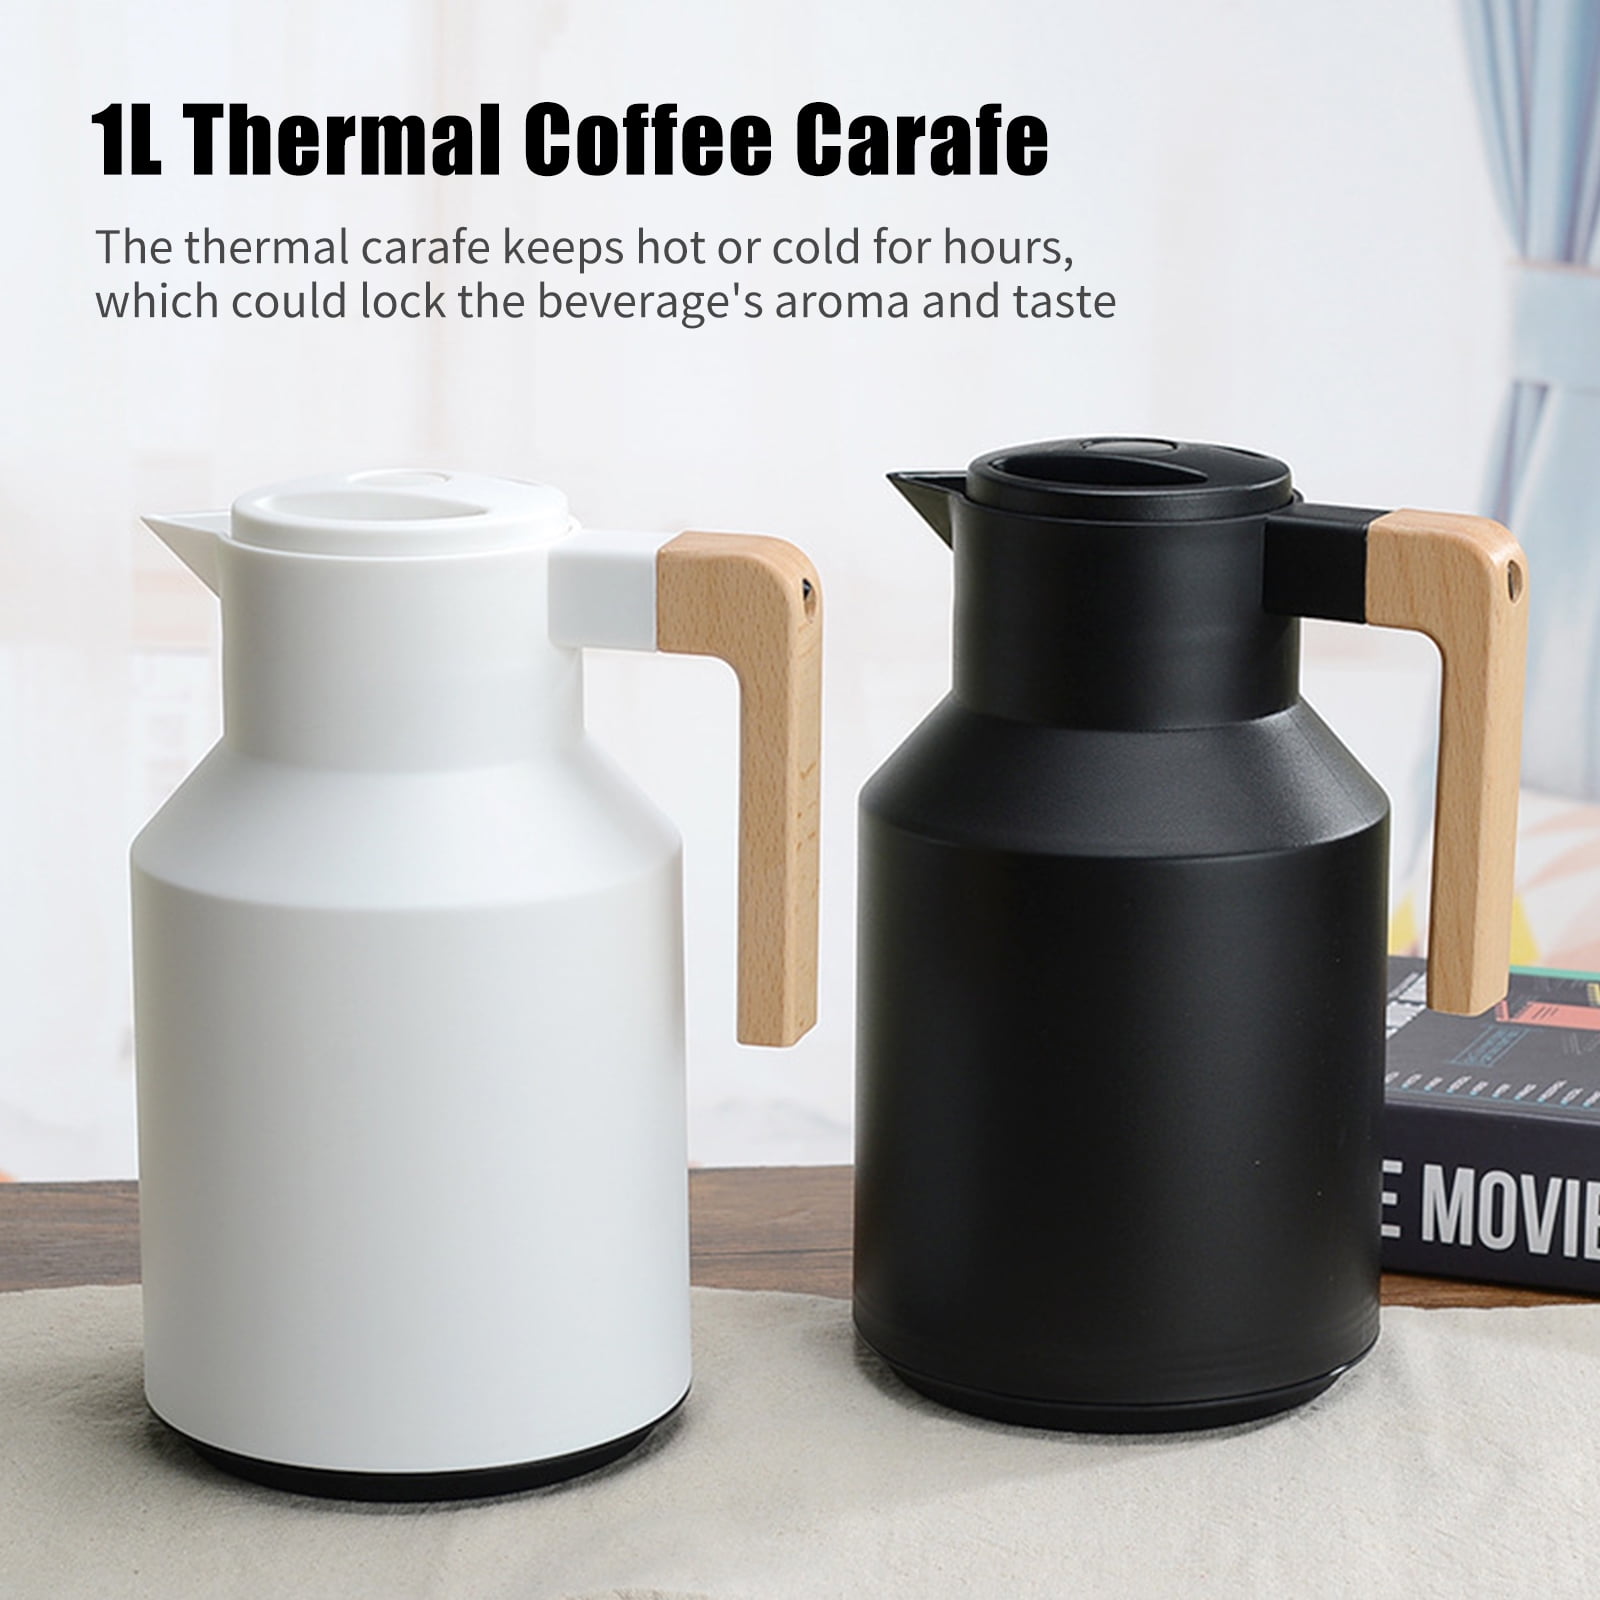 1pc 1000ml Insulated Thermal Coffee Carafe for Keeping Hot Coffee